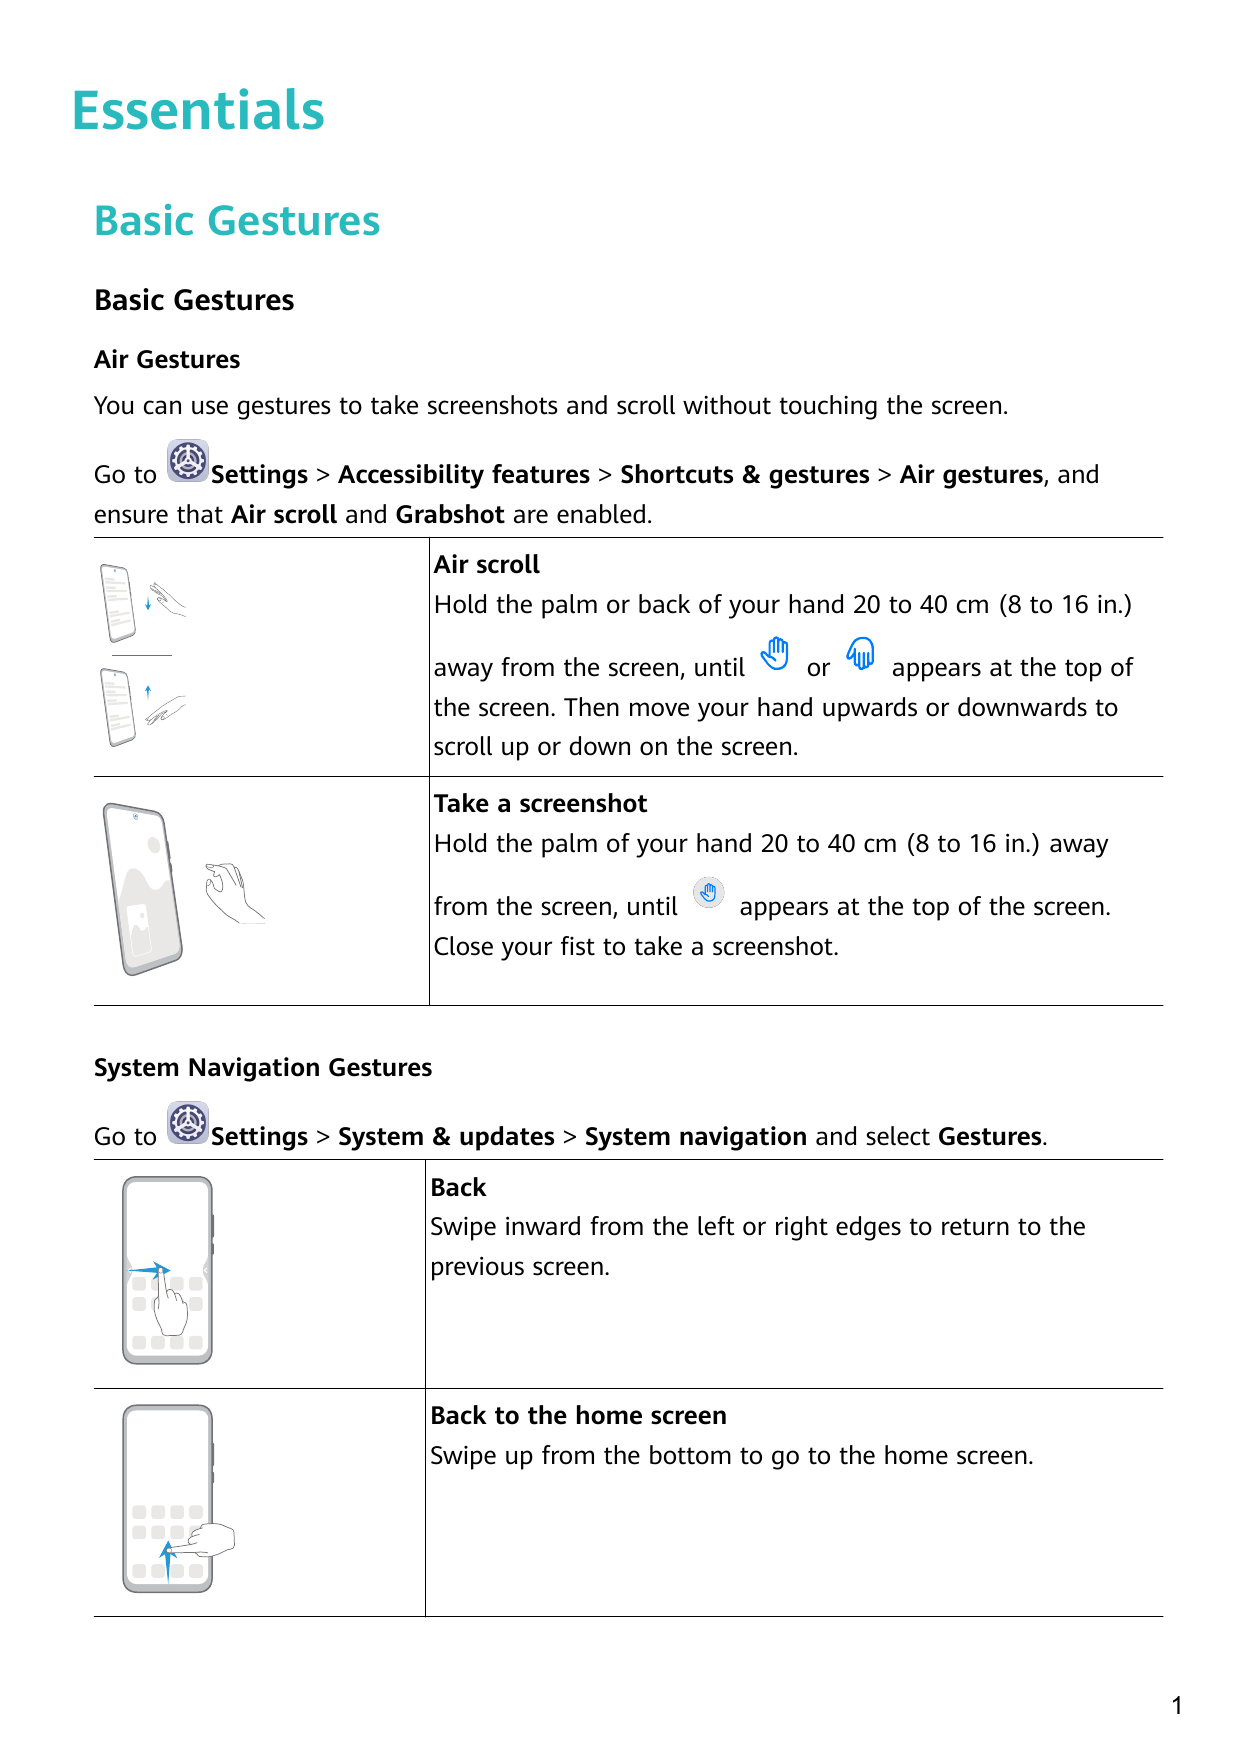 EssentialsBasic GesturesBasic GesturesAir GesturesYou can use gestures to take screenshots and scroll without touching the scree